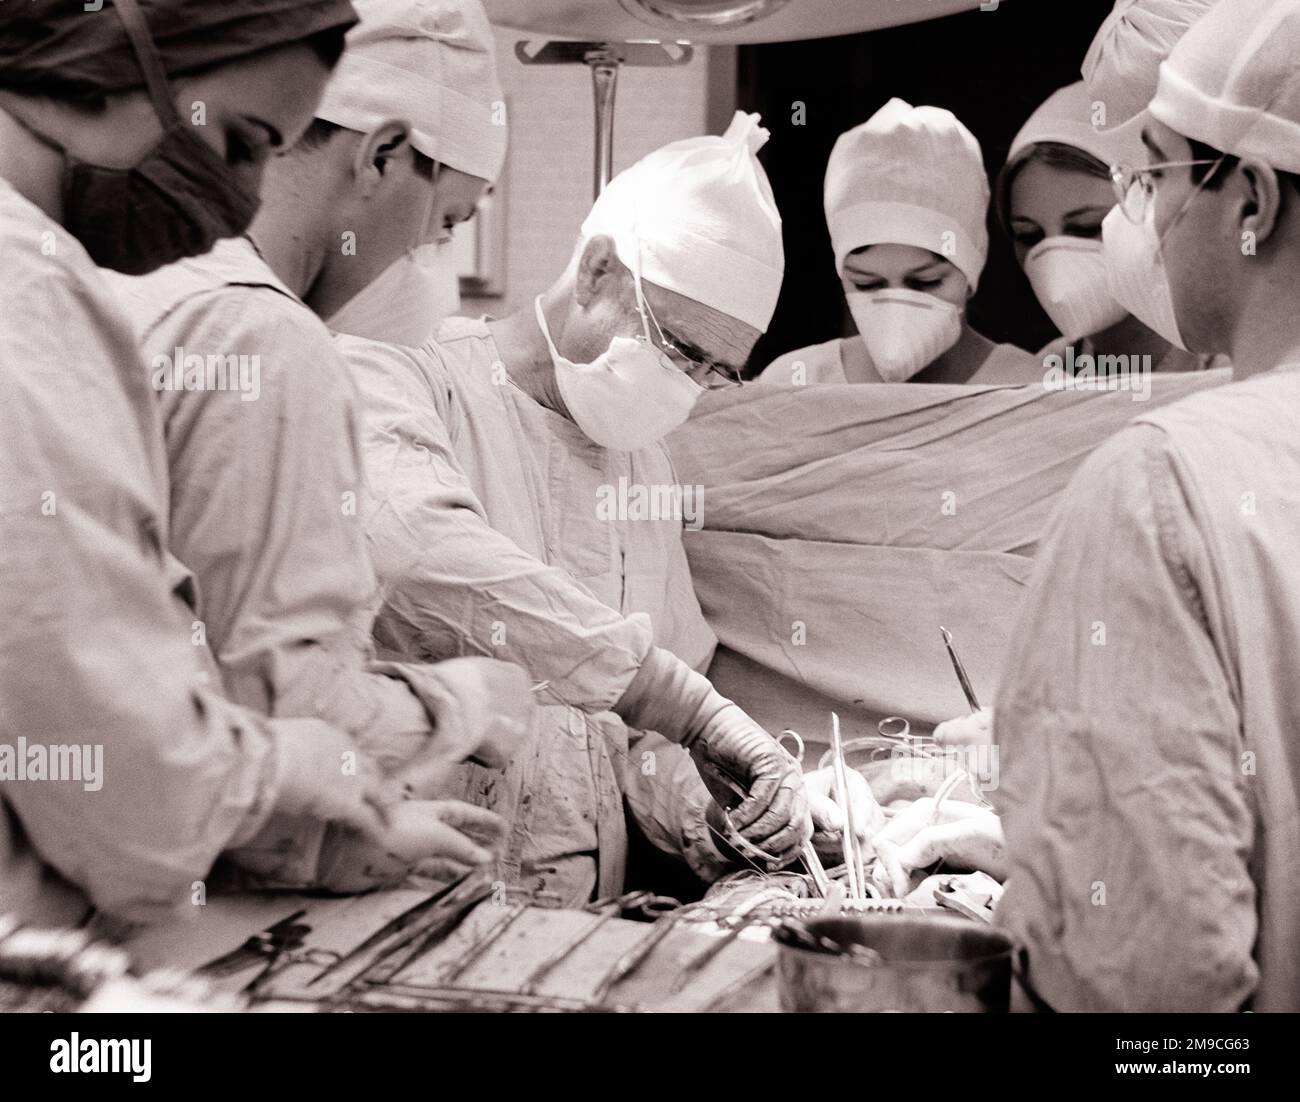 1960s SURGEON WITH ASSISTING DOCTORS AND NURSES PERFORMING OPEN HEART SURGERY - m7837 HAR001 HARS INSPIRATION MALES SIX PROFESSION CONFIDENCE MIDDLE-AGED B&W MIDDLE-AGED MAN HEALTHCARE PERFORMING SURGERY SKILL OCCUPATION SKILLS OPERATING PREVENTION PROVIDER PROVIDERS PRACTITIONERS HEALING AND DIAGNOSIS SURGICAL CAREERS EXCITEMENT LEADERSHIP PHYSICIANS PROGRESS INNOVATION LABOR OPERATING ROOM HEALTH CARE EMPLOYMENT IMPAIRMENT OCCUPATIONS SURGEON TREATMENT CONNECTION HEALER CONCEPTUAL HOSPITALS OPERATION PHYSICIAN PRACTITIONER SUPPORT FACILITY INFRASTRUCTURE EMPLOYEE FACILITIES ASSISTING Stock Photo